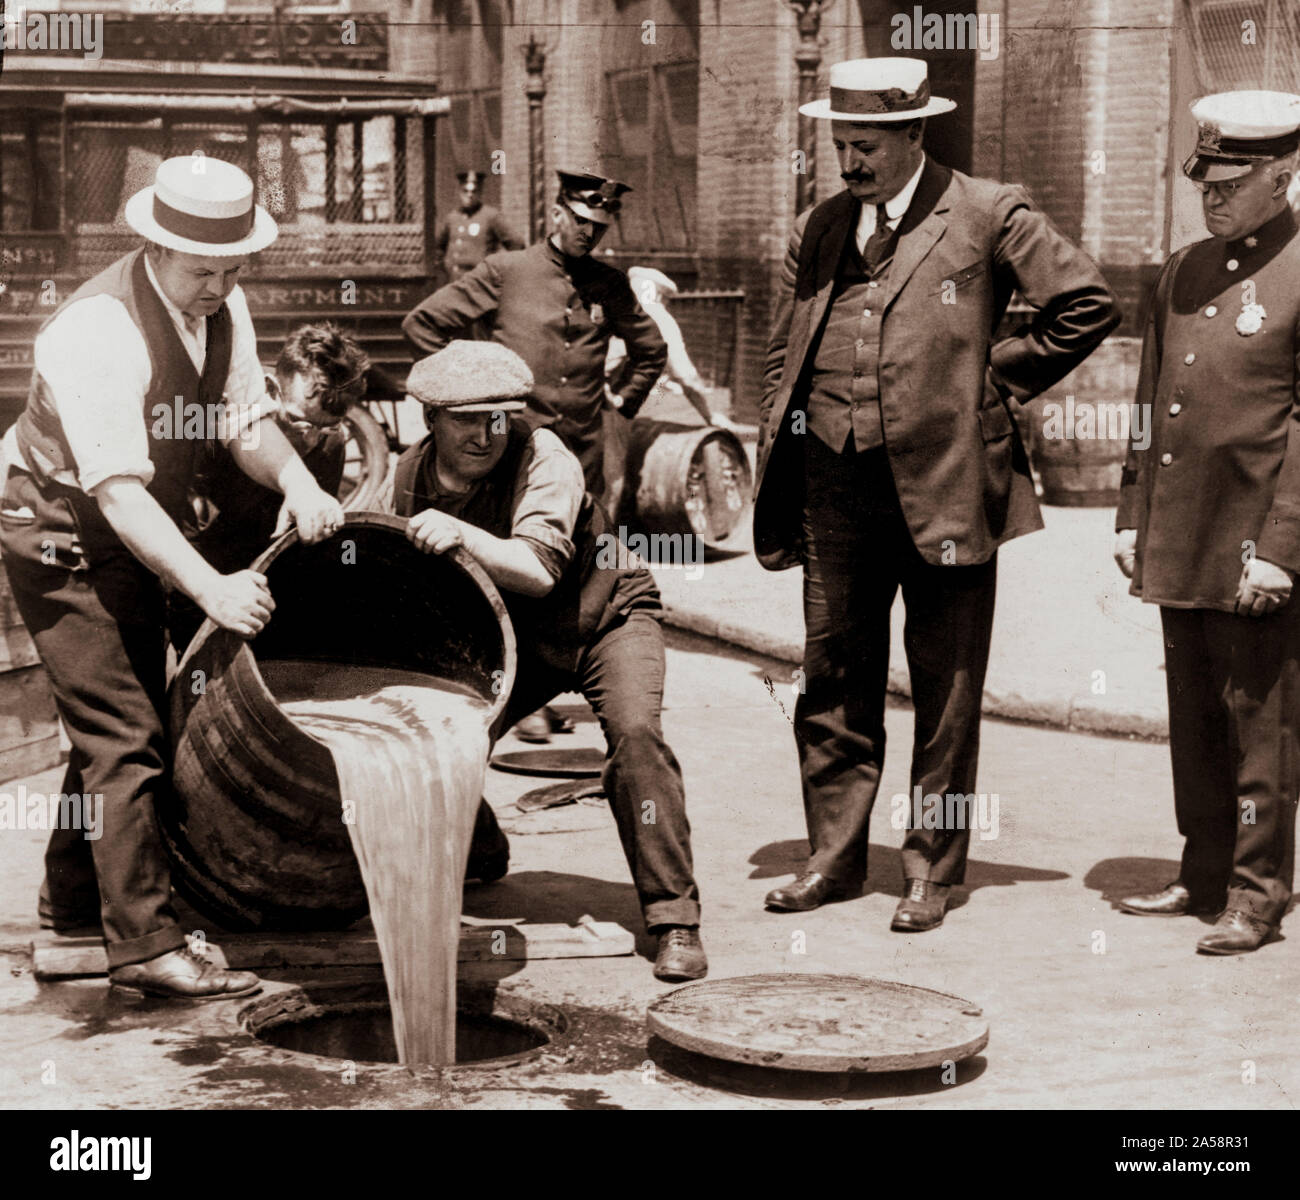 New York City Deputy Police Commissioner John A. Leach, right, watching agents pour liquor into sewer following a raid during the height of prohibition. Prohibition in the United States focused on the manufacture, transportation, and sale of alcoholic beverages; however, exceptions were made for medicinal and religious uses. Alcohol consumption was never illegal under federal law. Nationwide Prohibition did not begin in the United States until January 1920, when the Eighteenth Amendment to the U.S. Constitution went into effect. The 18th amendment was ratified in 1919. Stock Photo